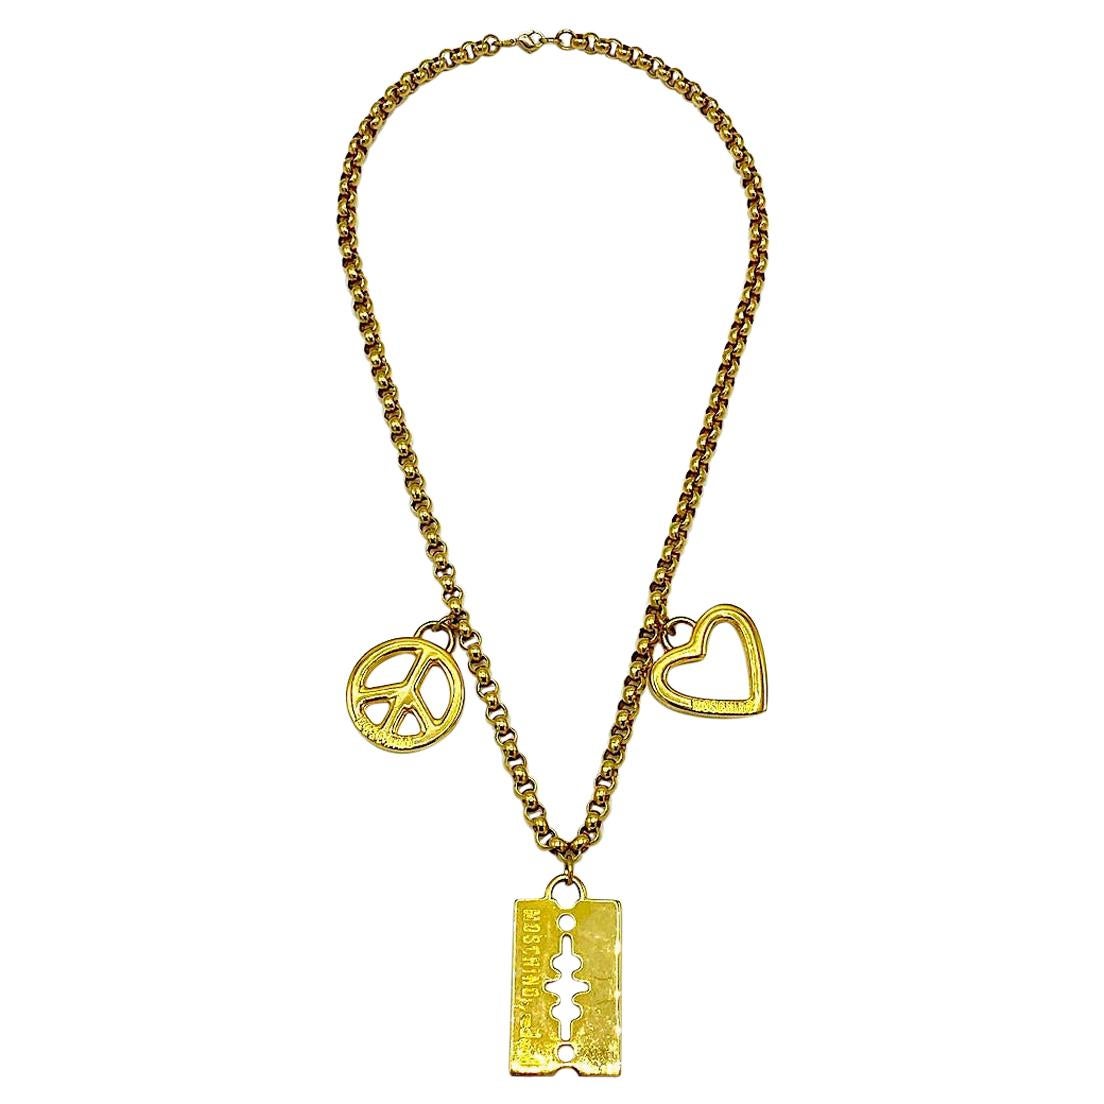 Moschino Redwall Italian 1990s Charm Necklace